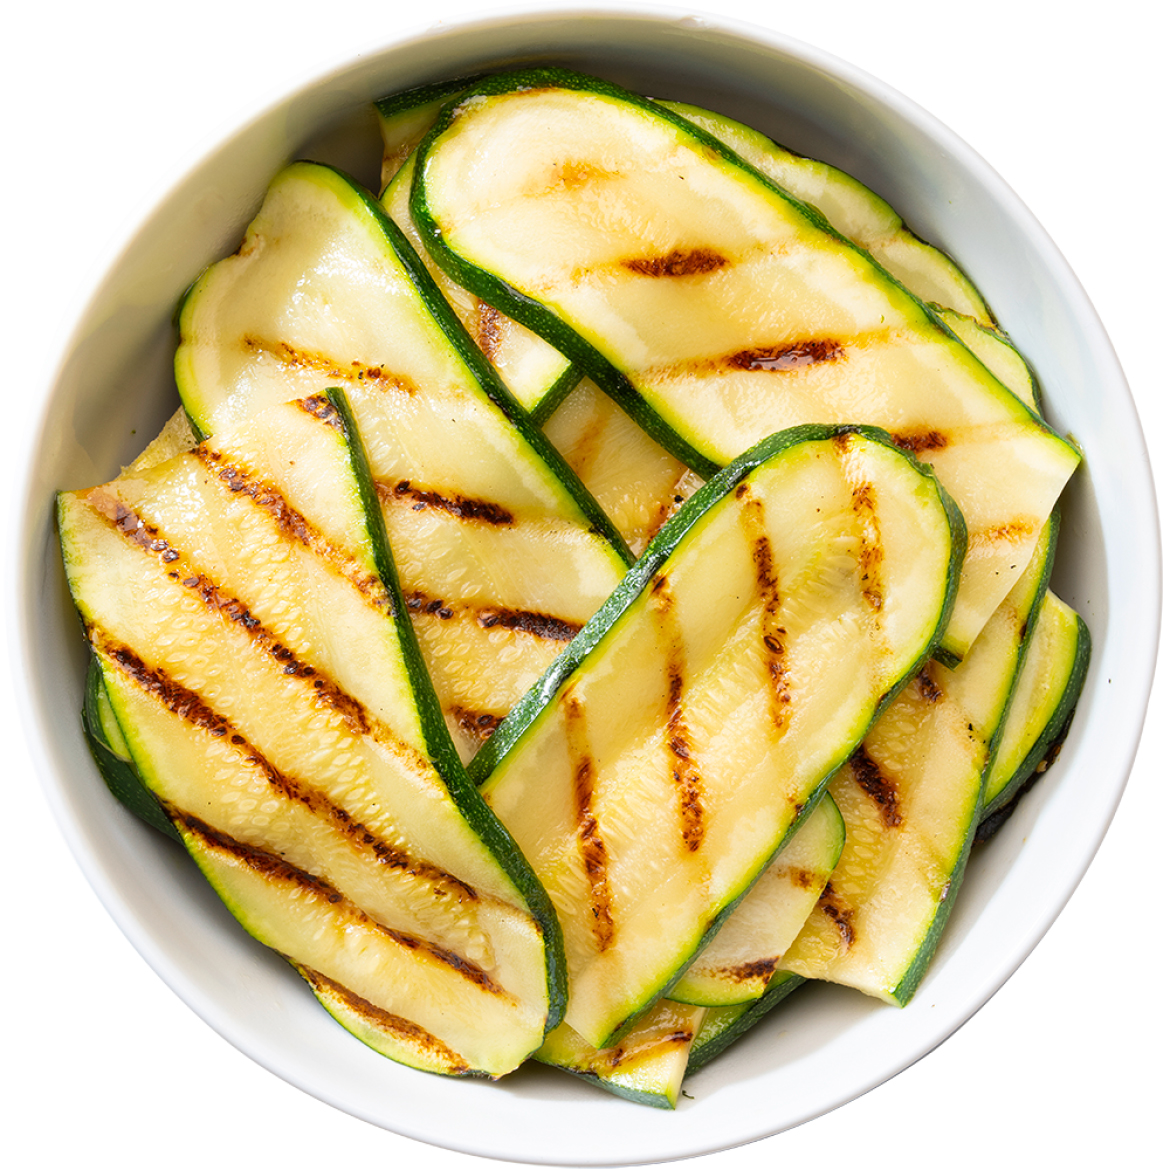 COURGETTES GRILLEES MAGDA